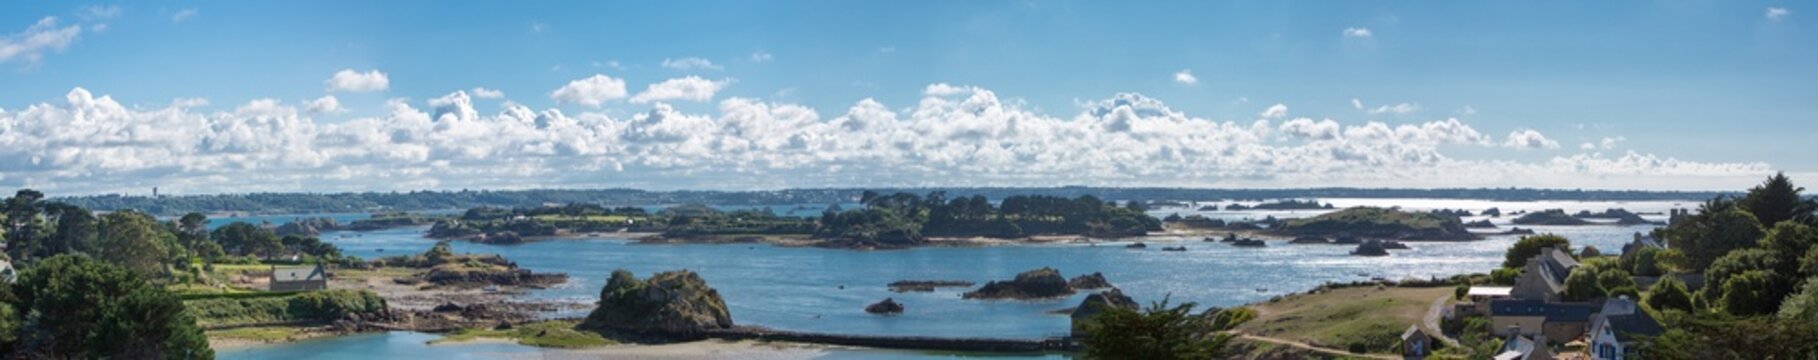 Brehat island in Brittany